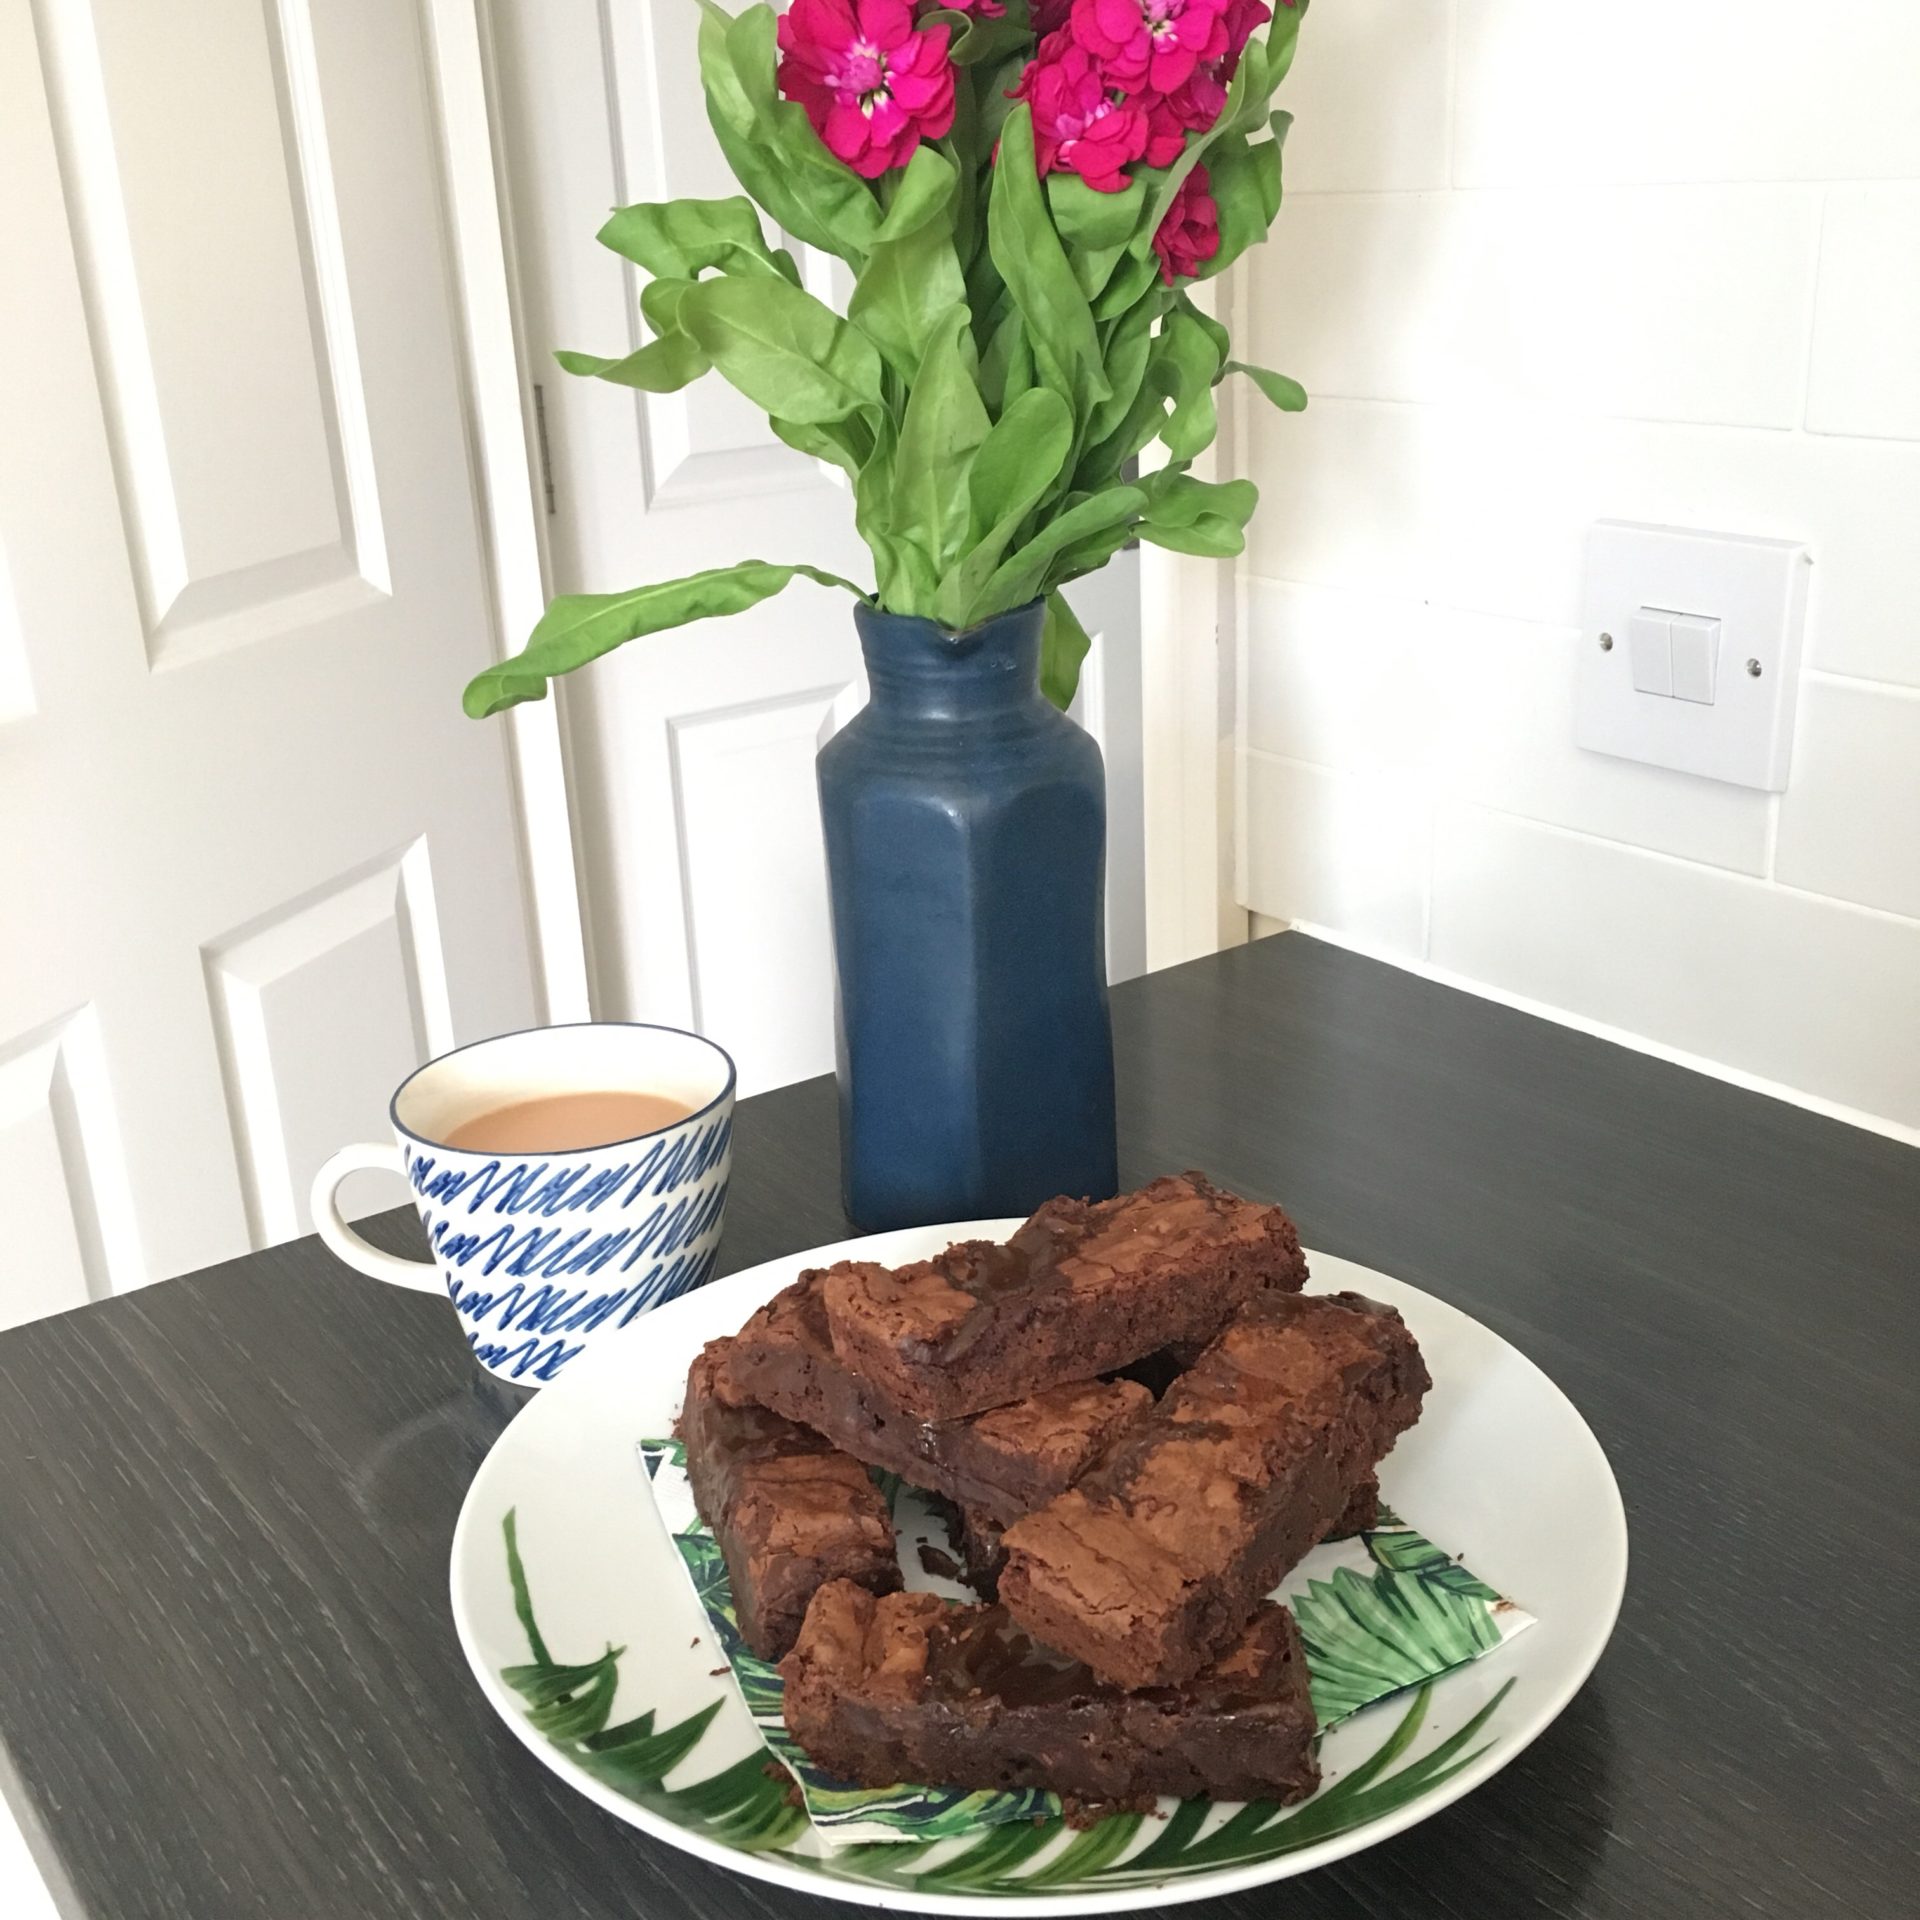 Homemade Suffolk brownies delivered to your door? Yes please!